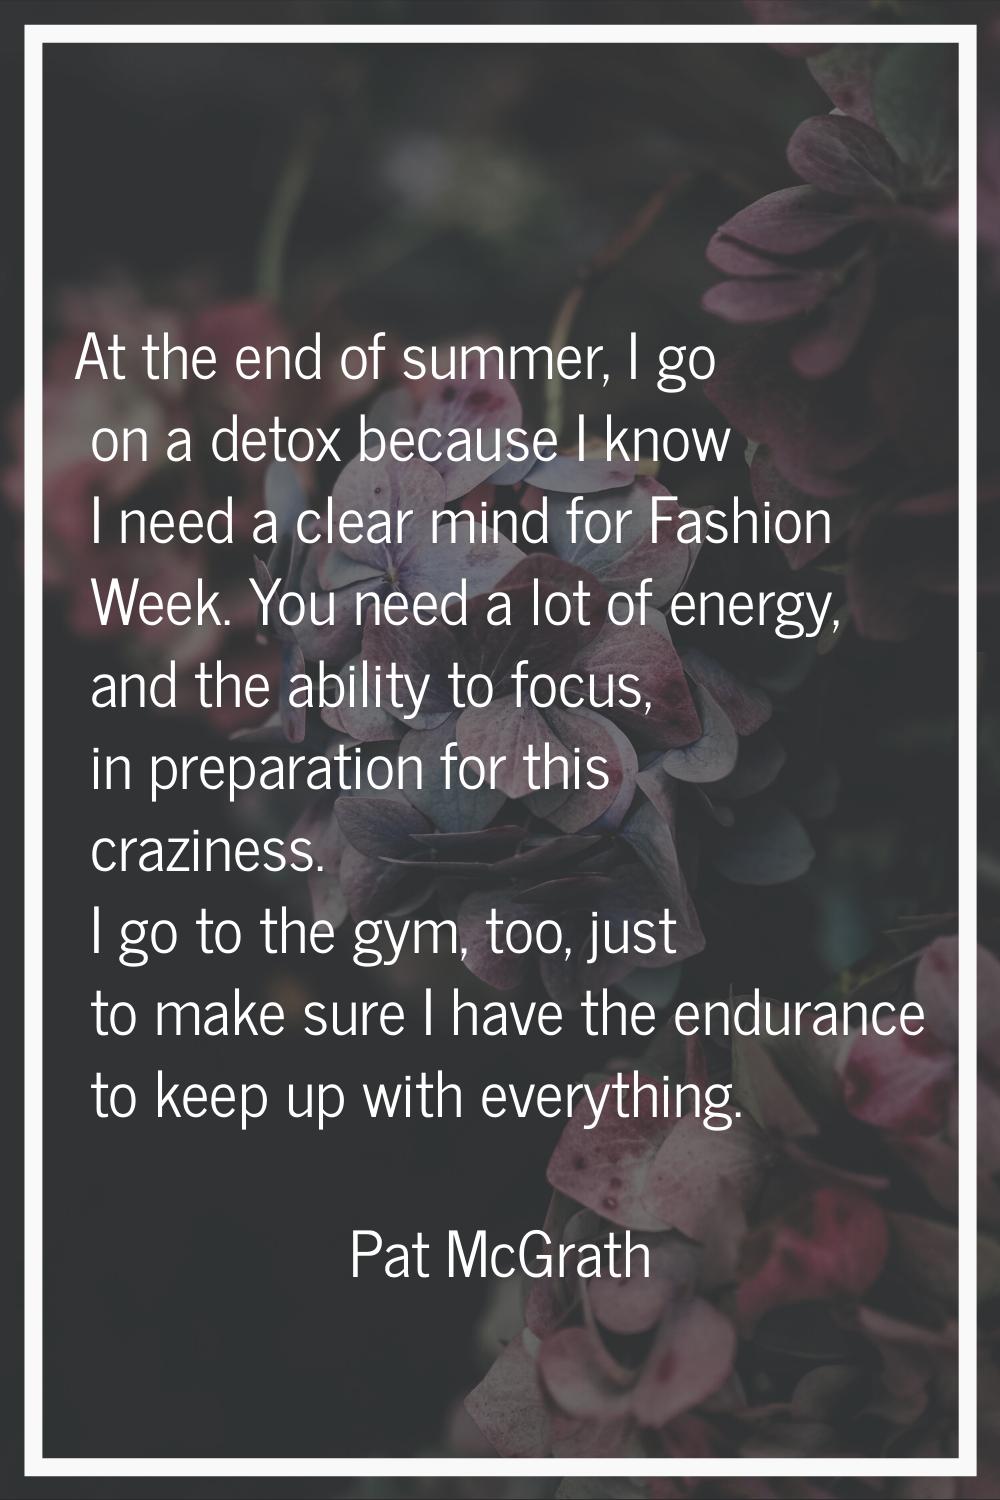 At the end of summer, I go on a detox because I know I need a clear mind for Fashion Week. You need